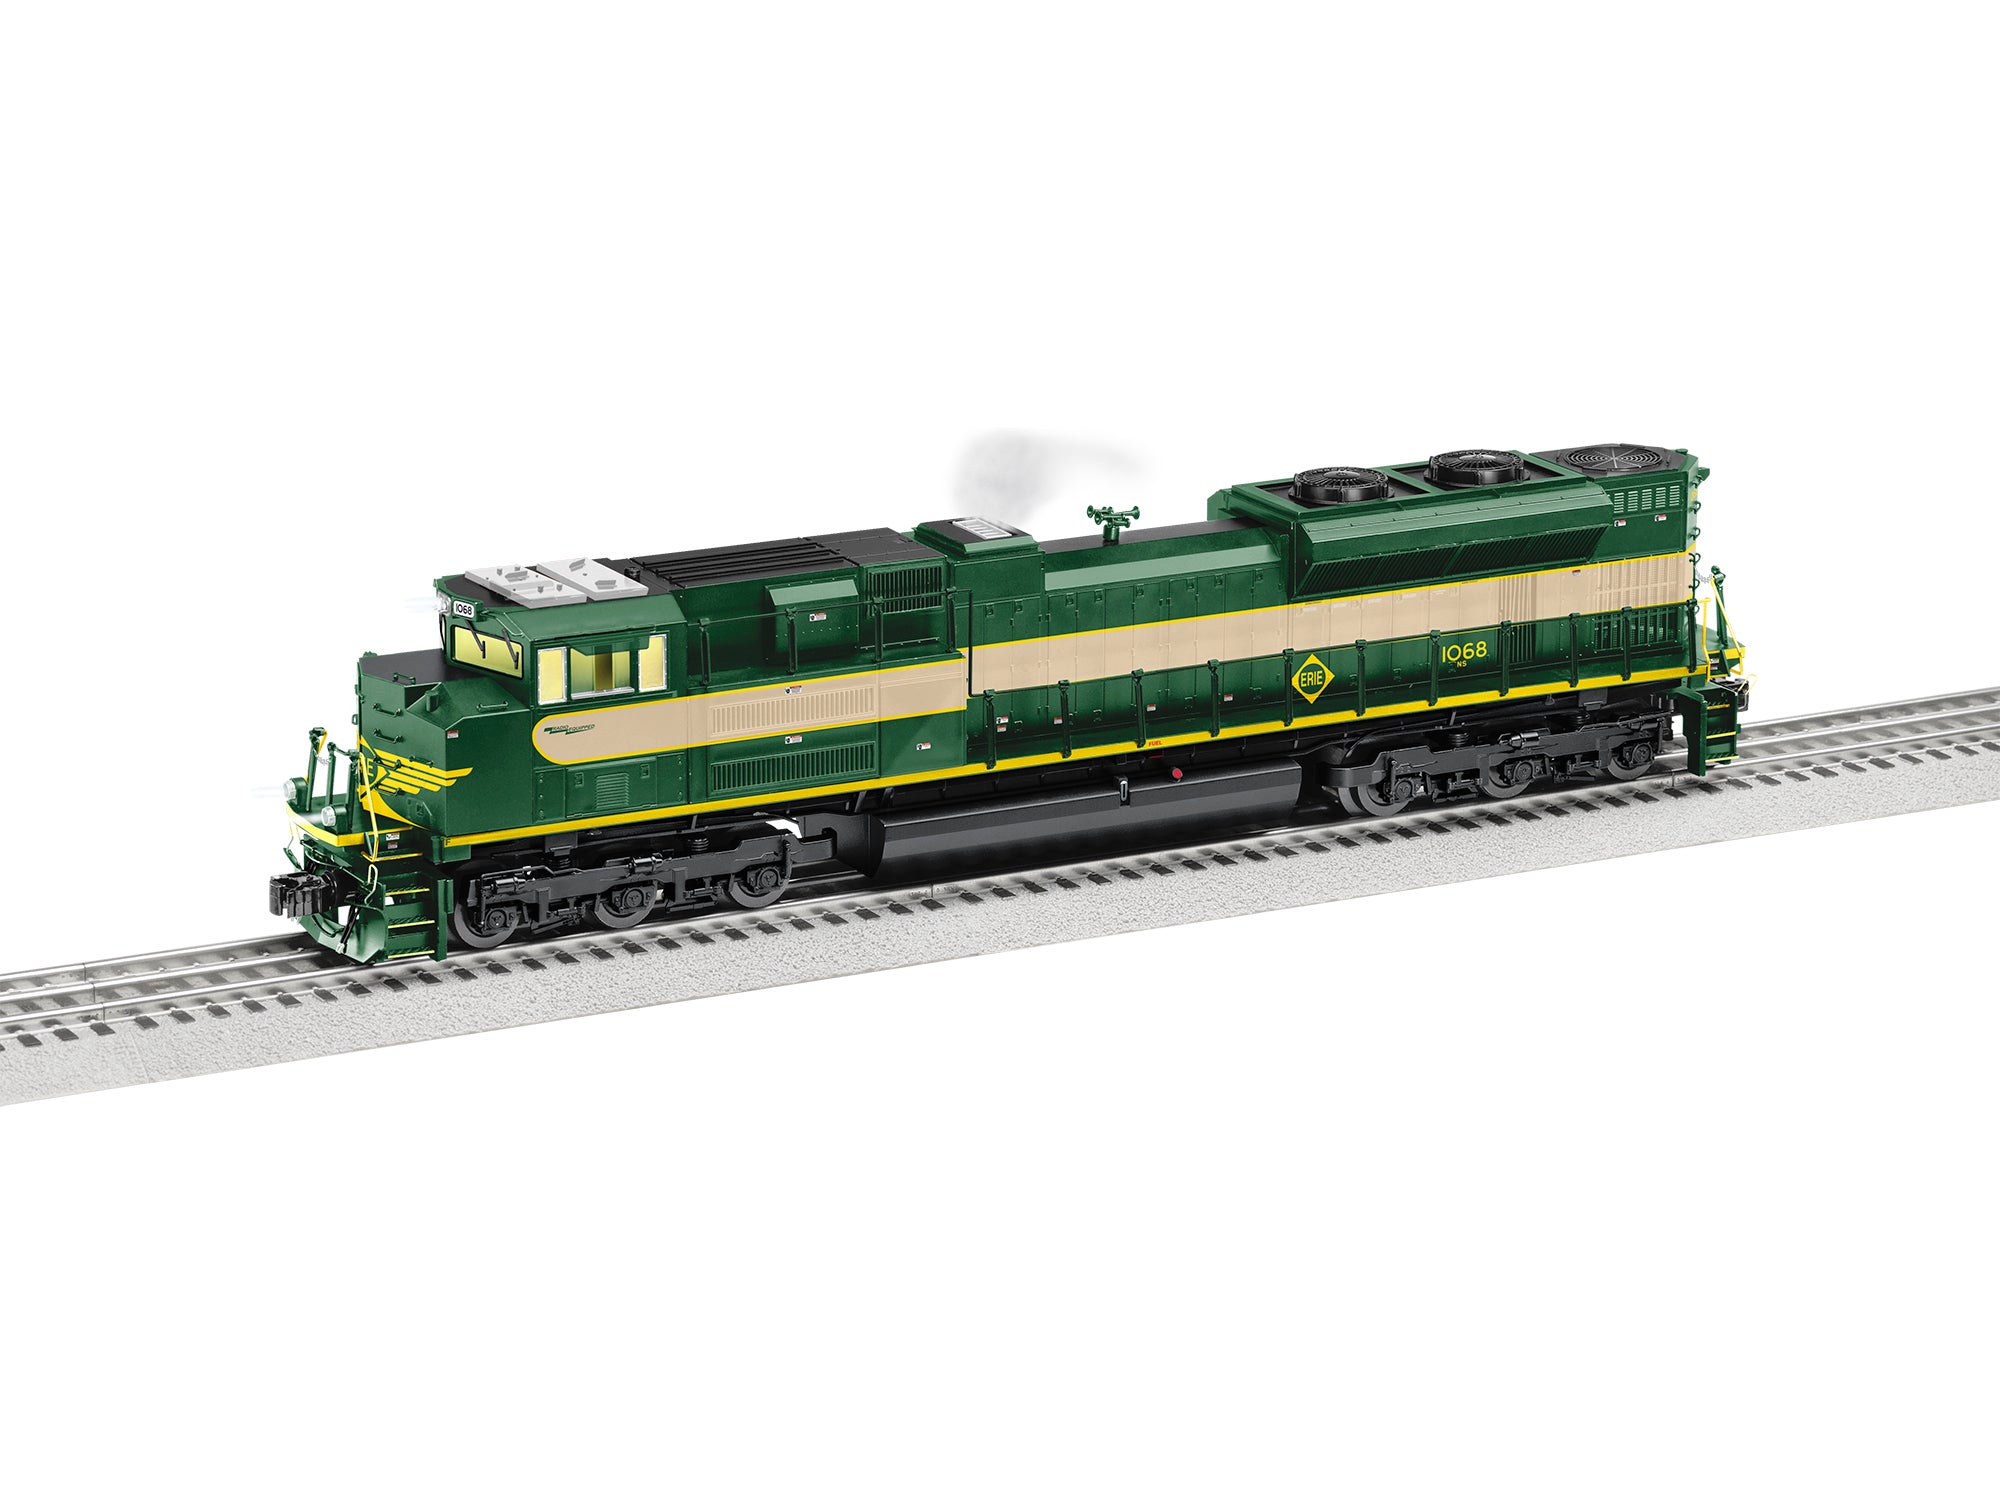 Lionel 2433069 - SD70ACE Diesel Engine "Erie" #1068 (Non-PWD) Norfolk Southern